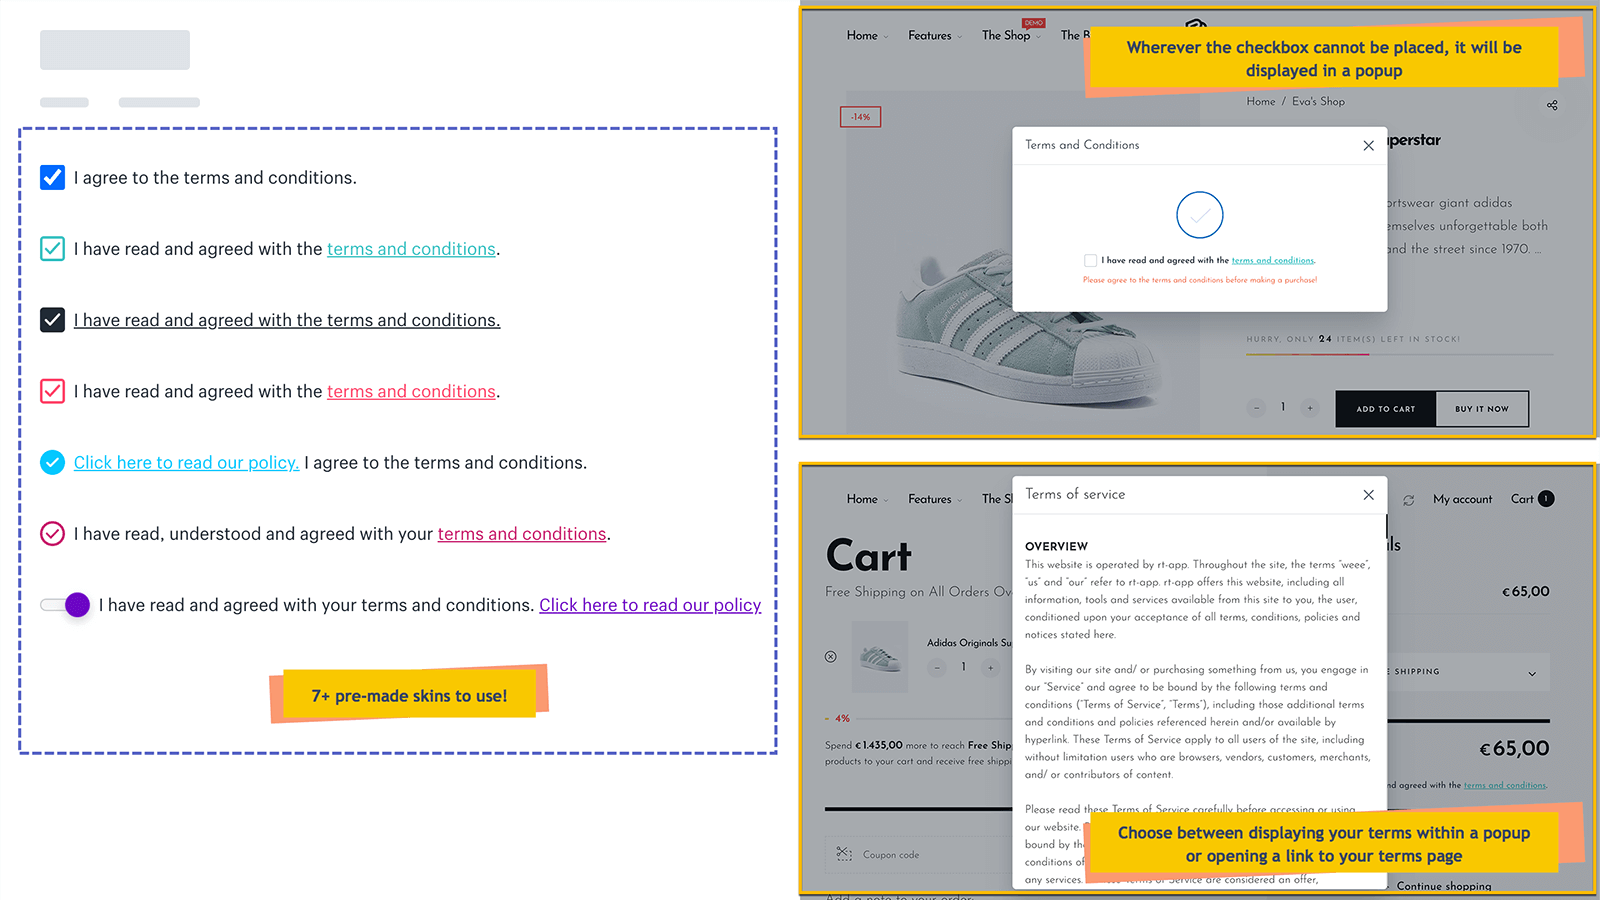 You can customize your ‘terms and conditions’ checkboxes and choose to display them in a pop-up when they click at the link